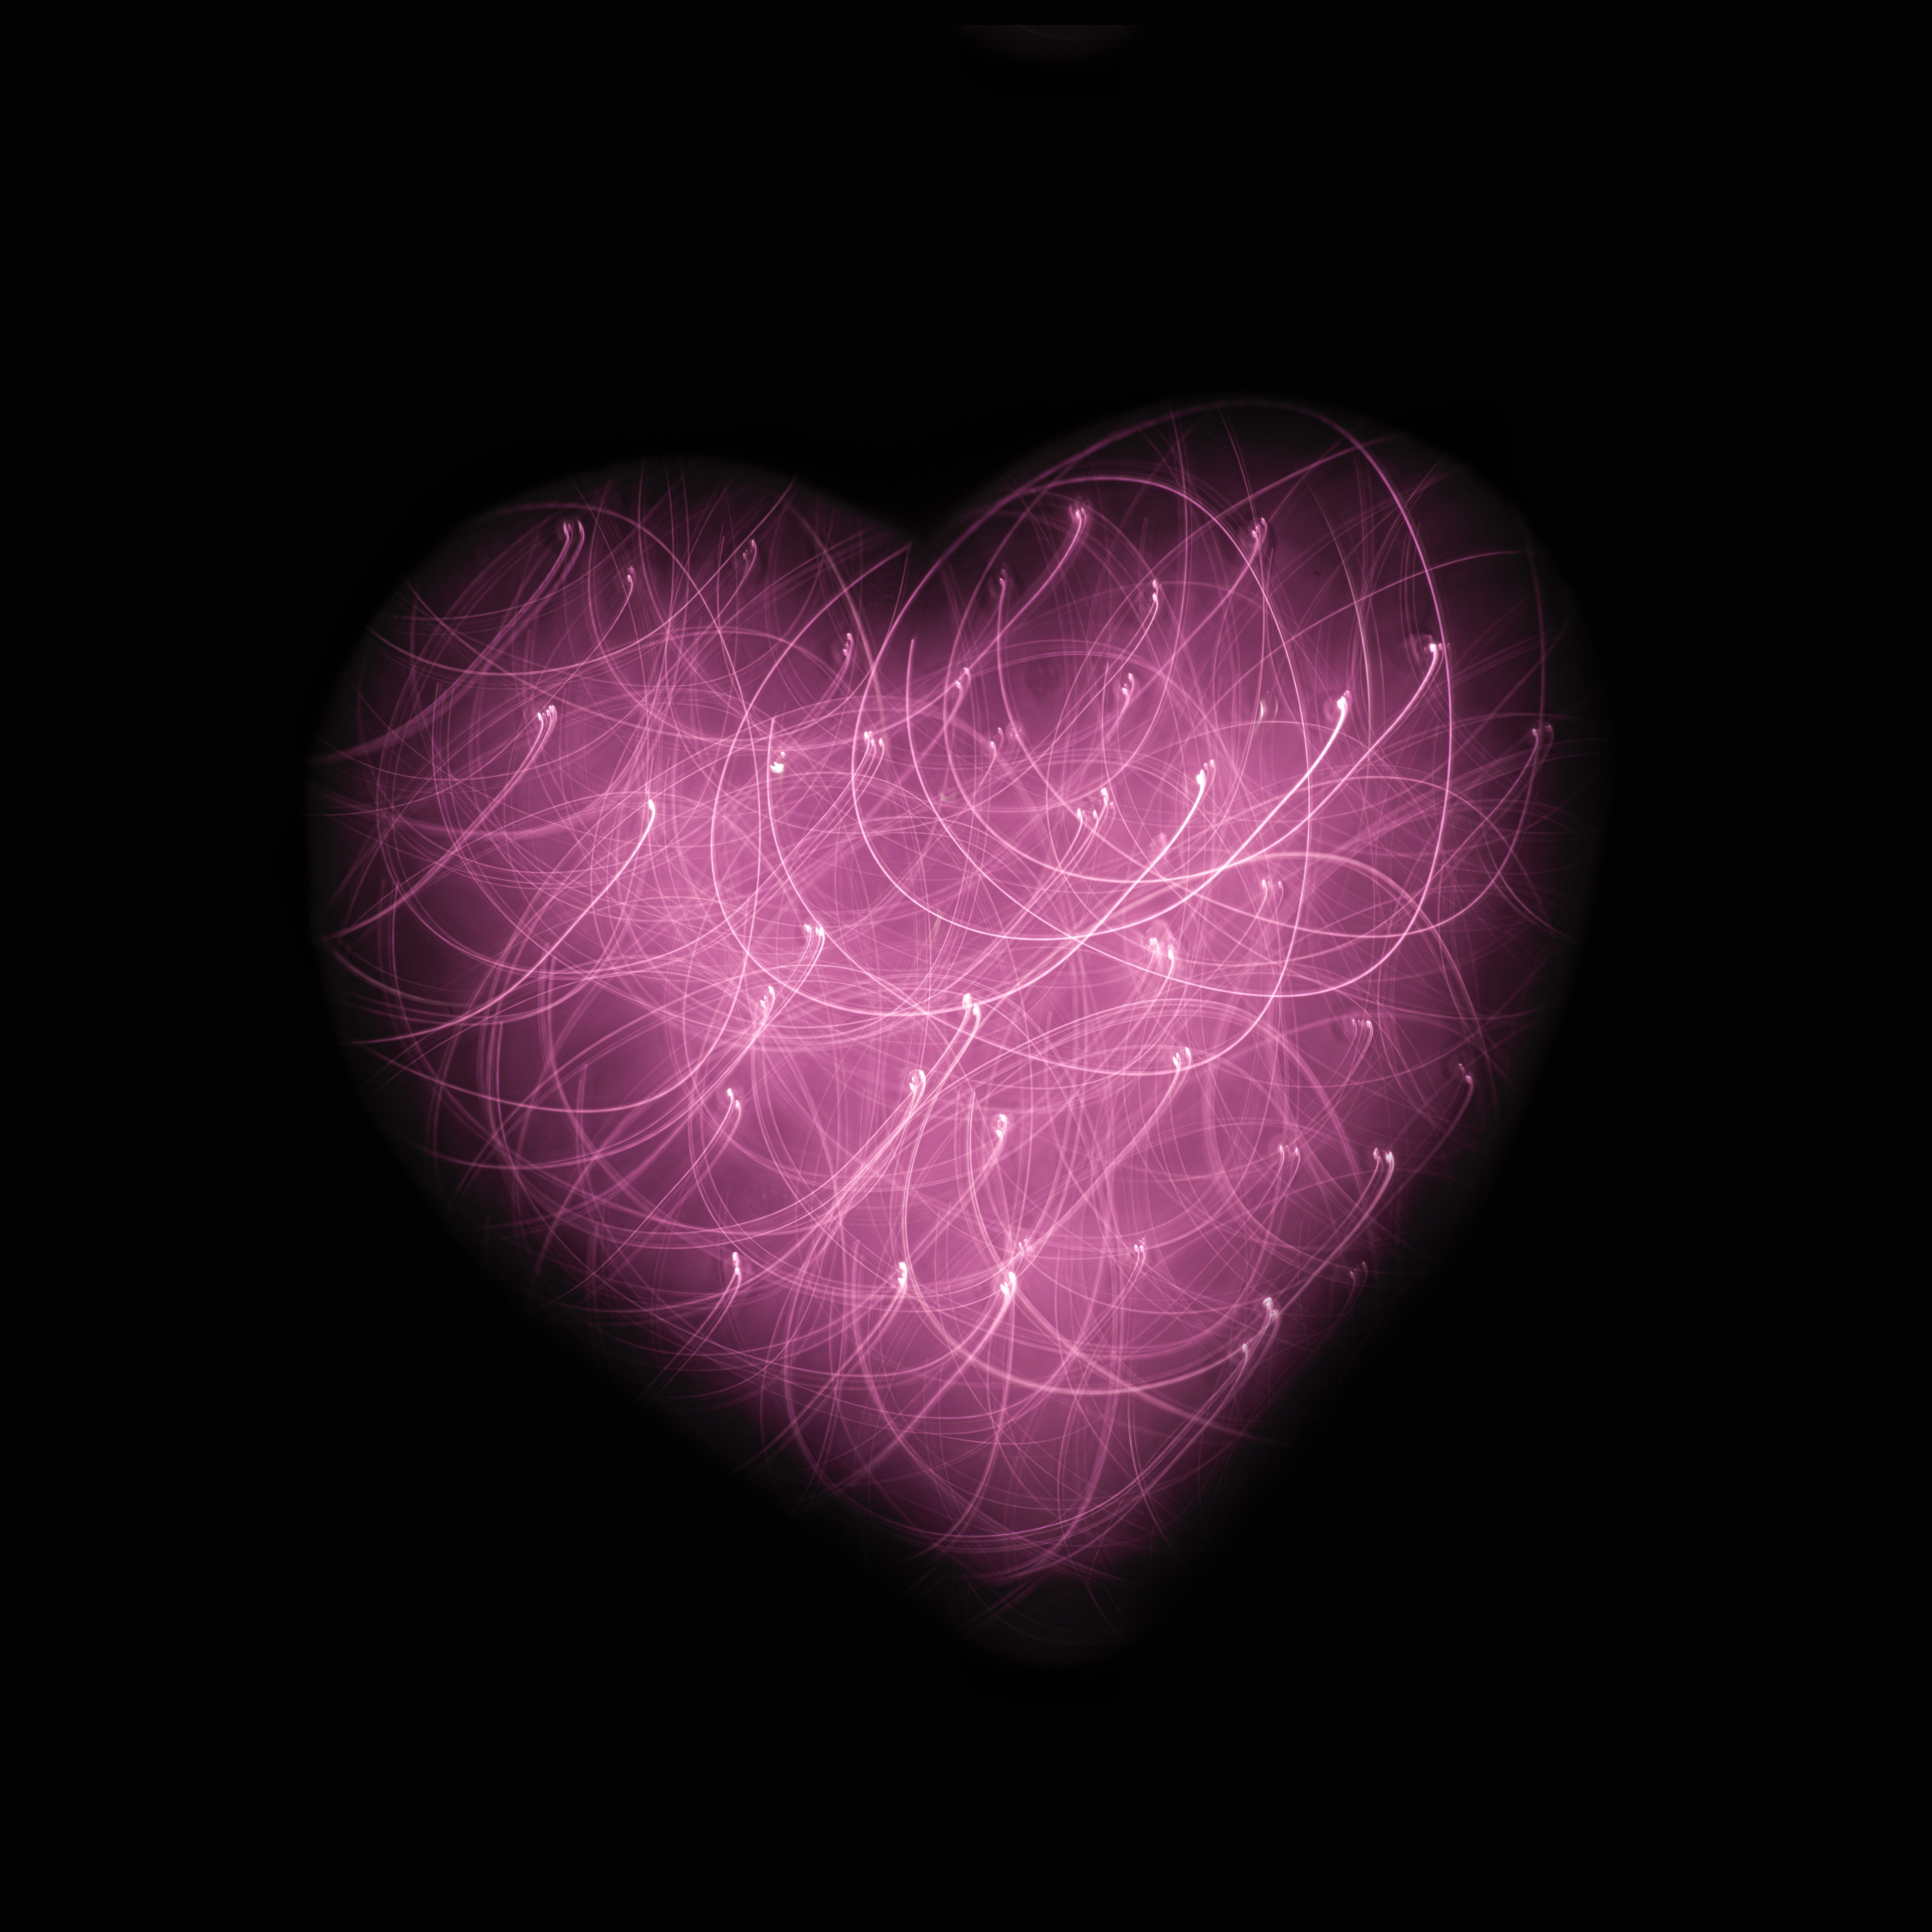 Download Pink heart, abstraction wallpaper, 2248x iPad Air, iPad Air iPad iPad iPad mini iPad mini 3